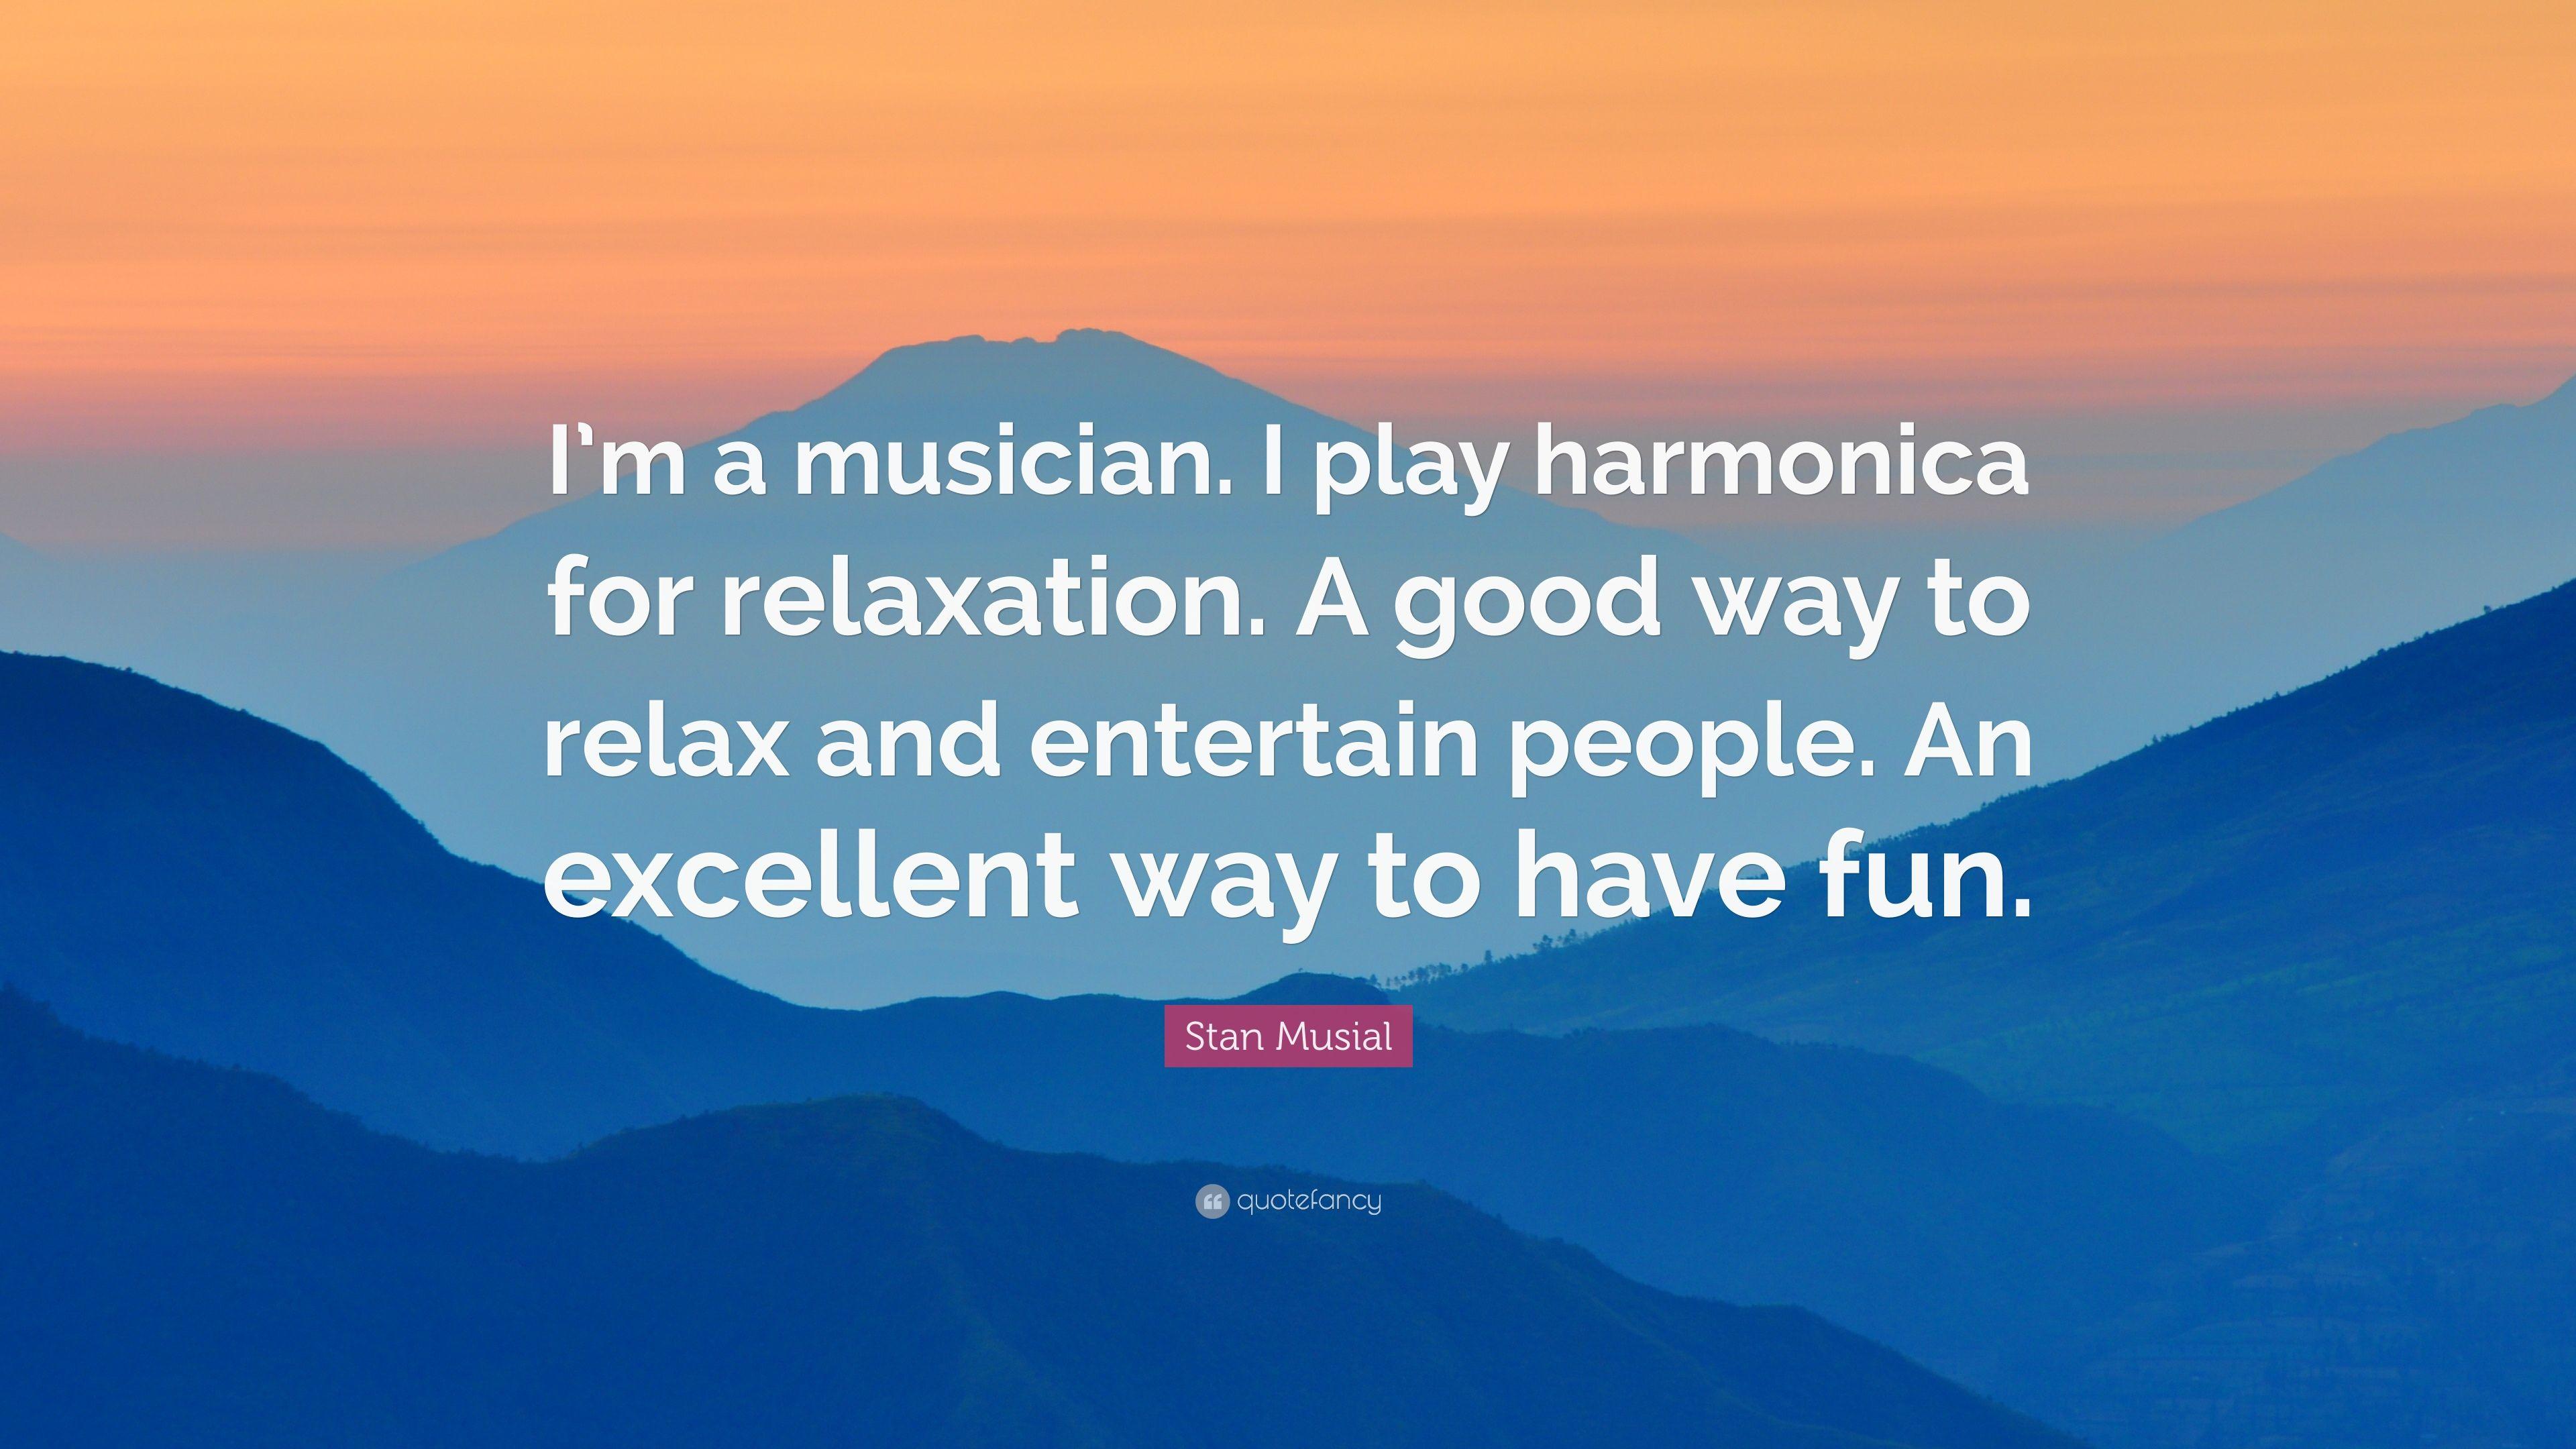 Stan Musial Quote: “I'm a musician. I play harmonica for relaxation